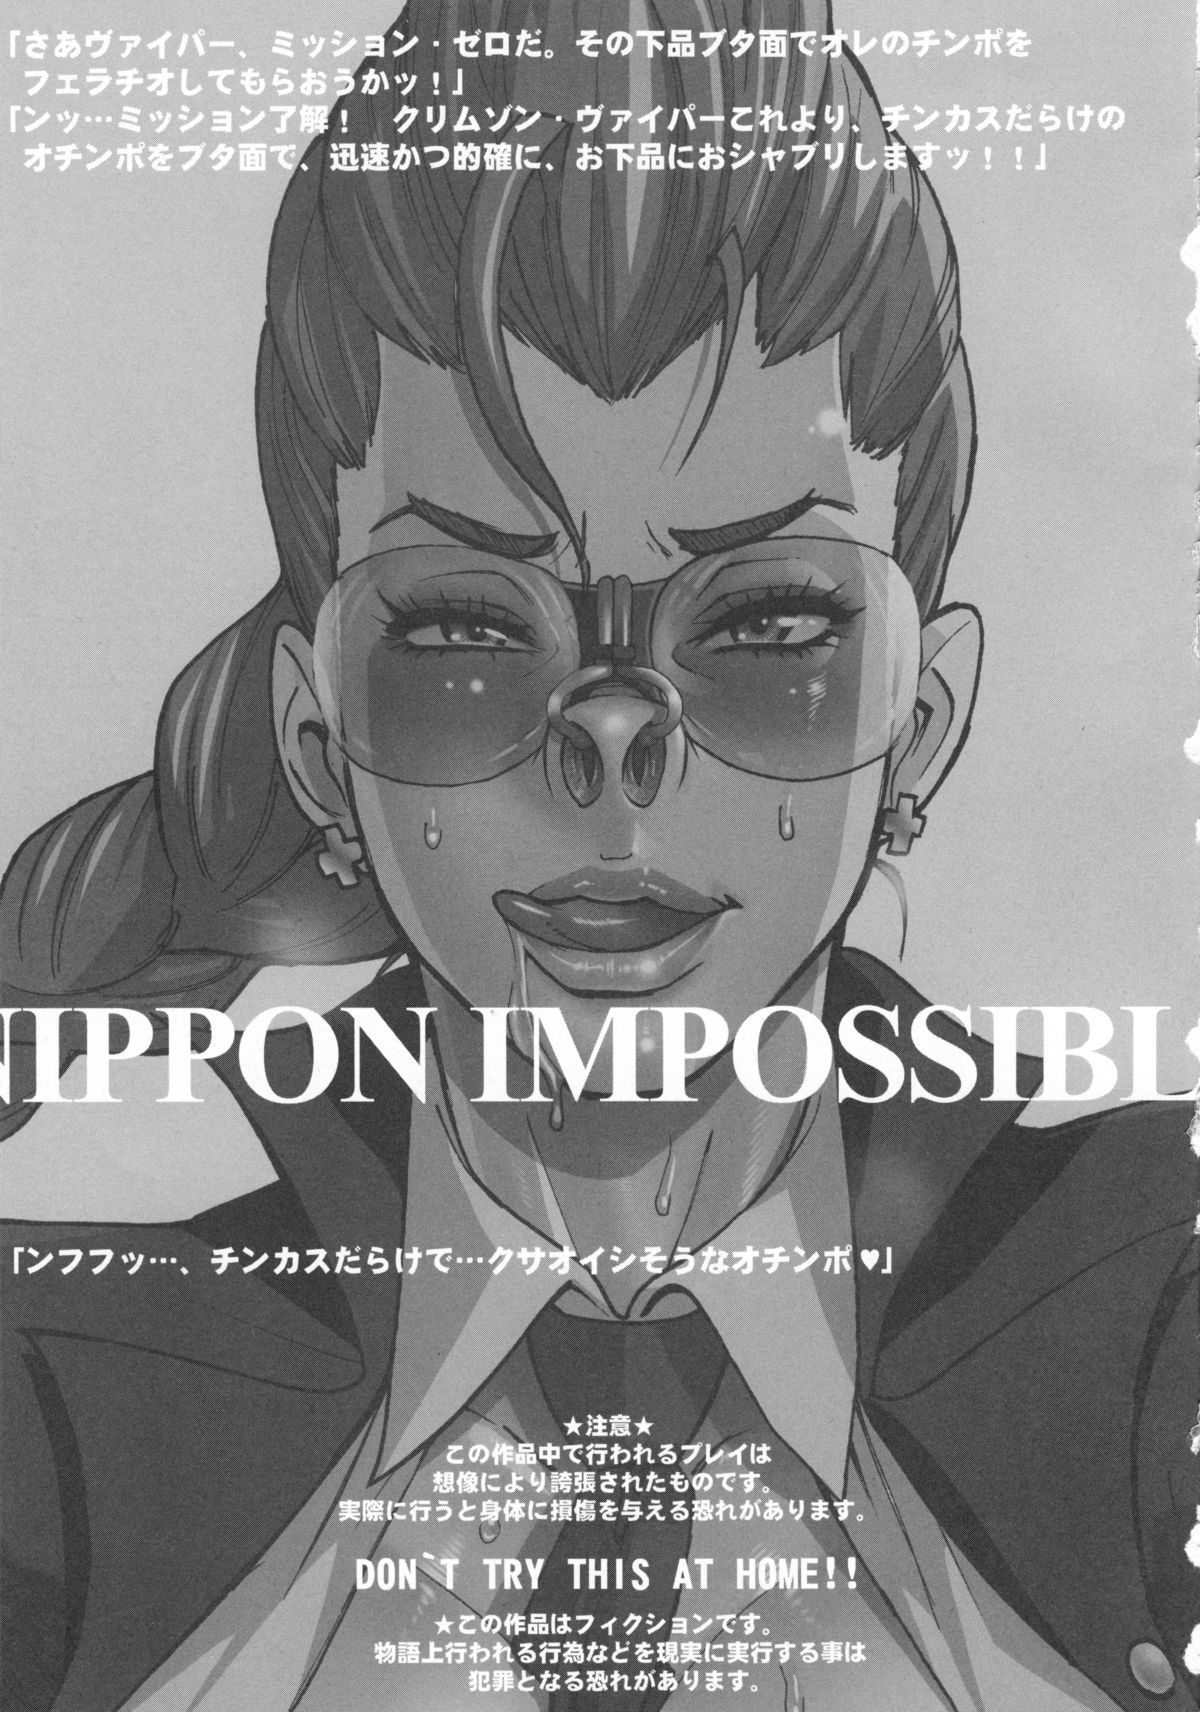 NIPPON IMPOSSIBLE numero d'image 1